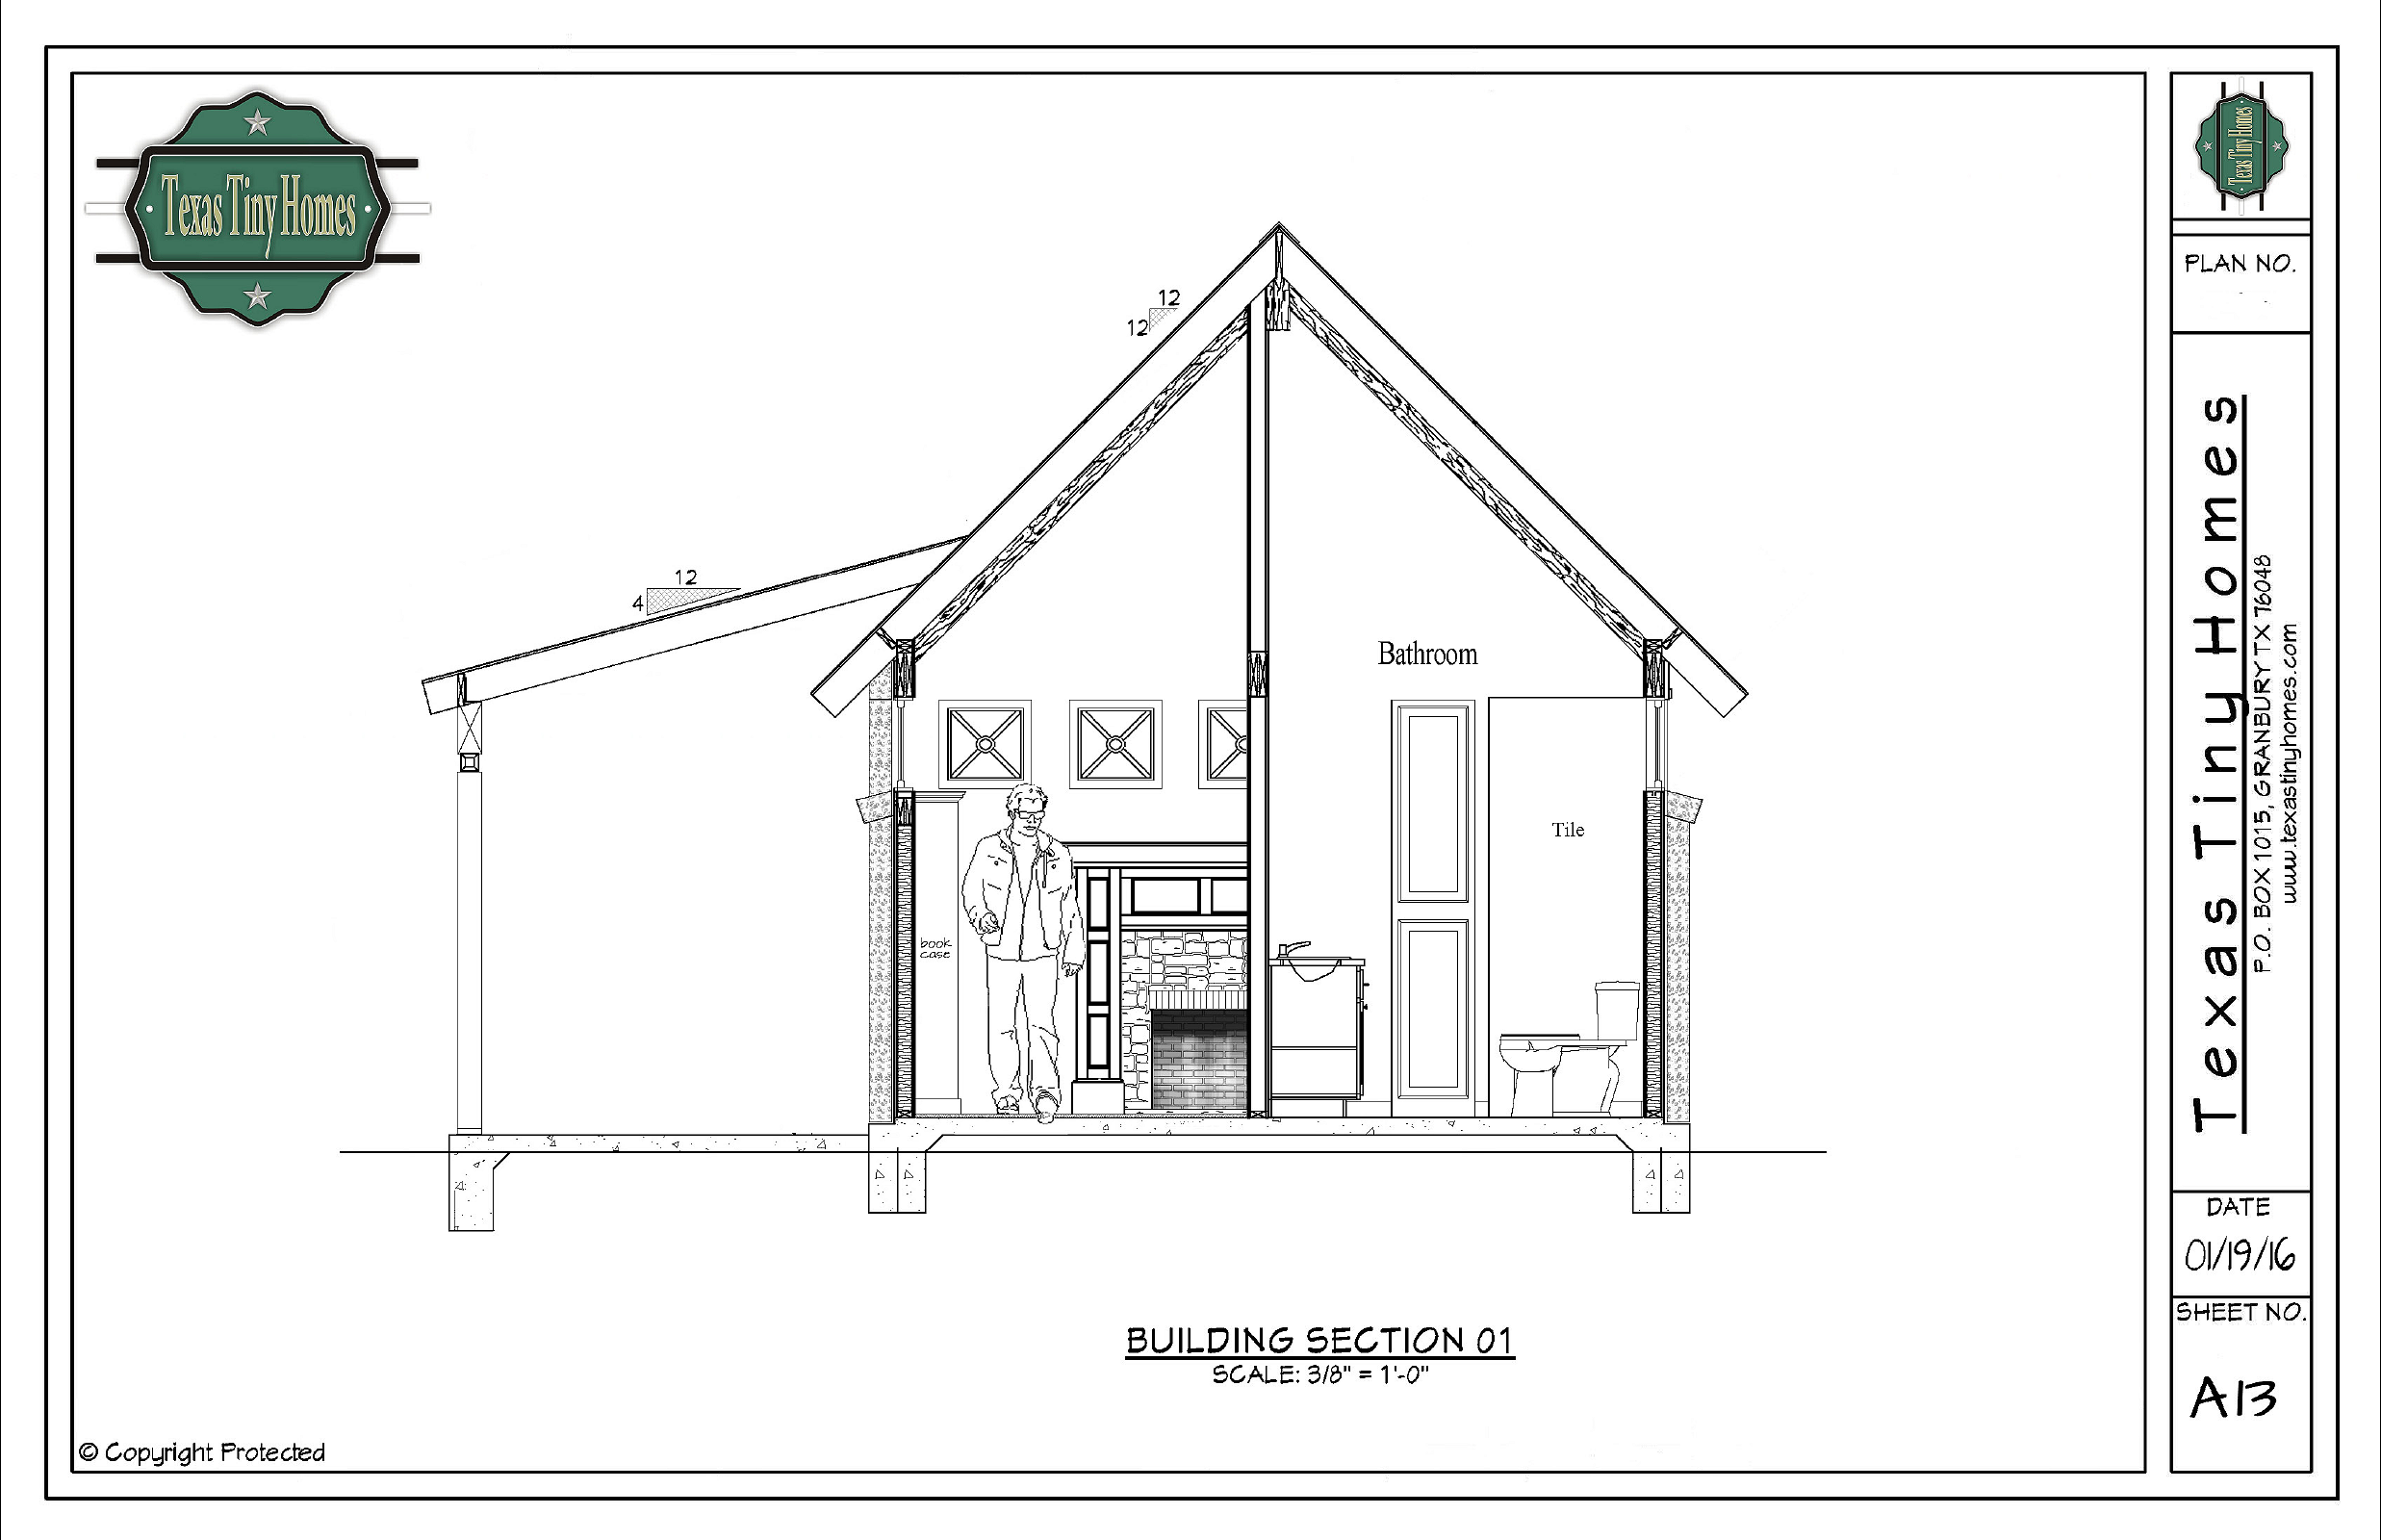 Tiny Houses, Tiny Homes, Tiny House Plans, Small House Plans, Micro Home Plans, Micro House Plans, Tiny Home Plans, Tiny House Builder, Tiny Houses Dallas, Tiny Houses Austin, Tiny Homes Builder, Small houses, Small Homes Builder, Small Luxury Homes, Little House Plans, Little Homes